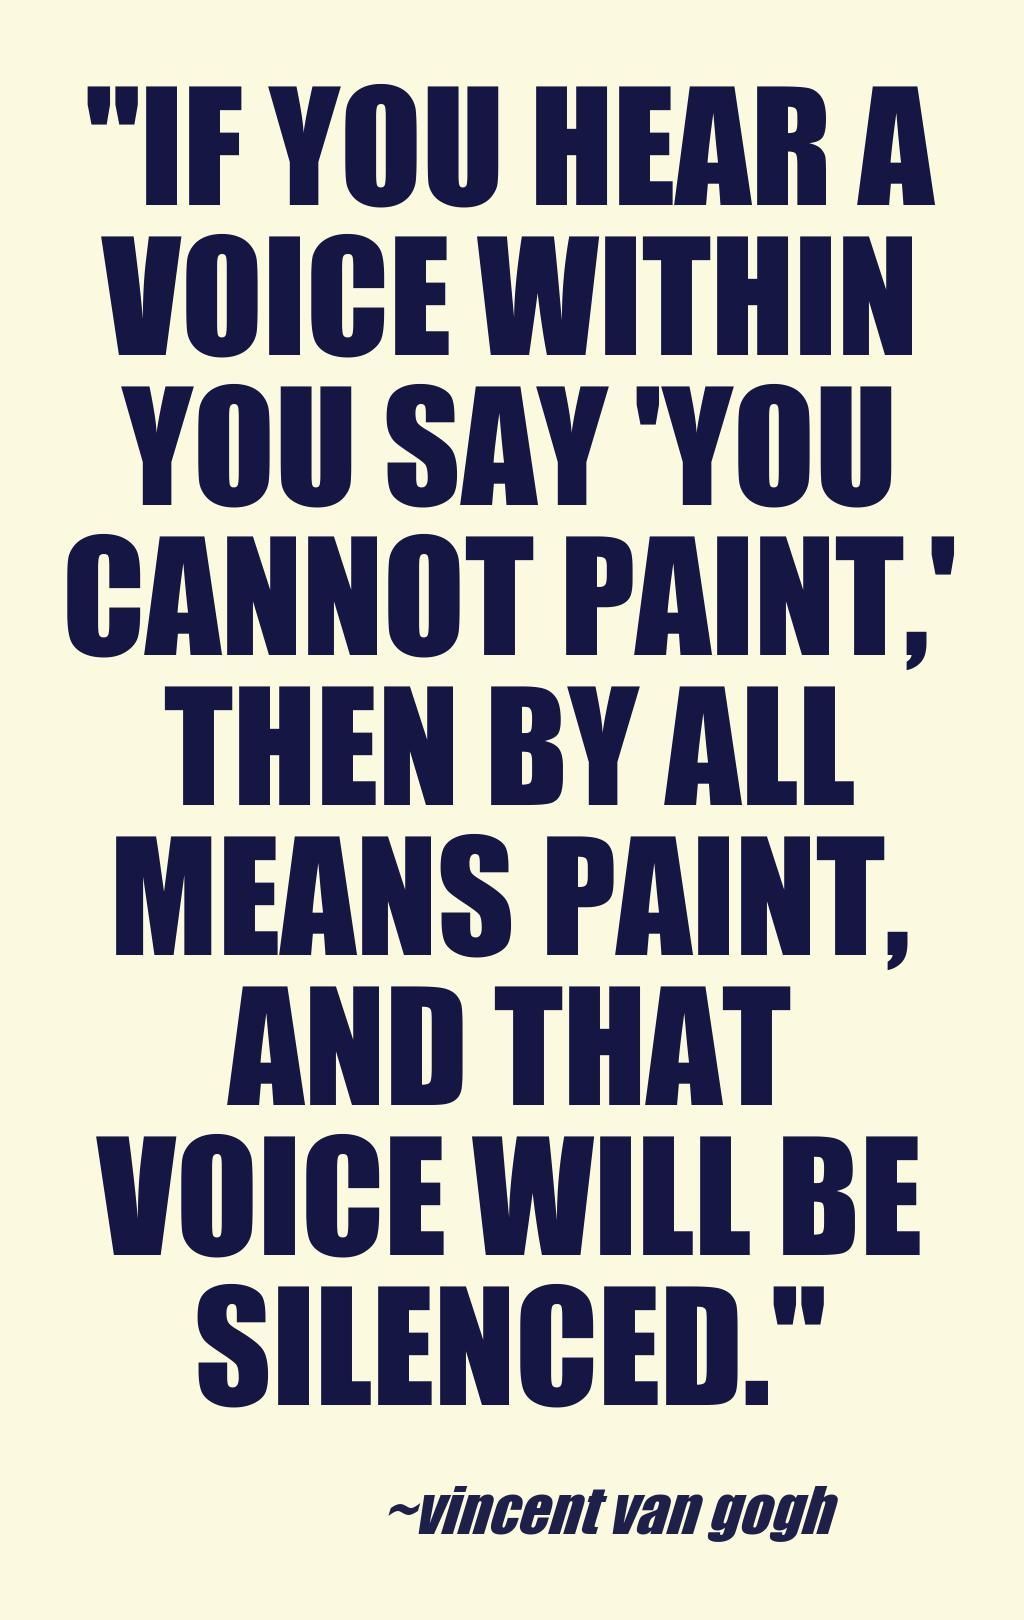 If you hear a voice within that says you can’t paint, then by all means paint and that voice will be silen